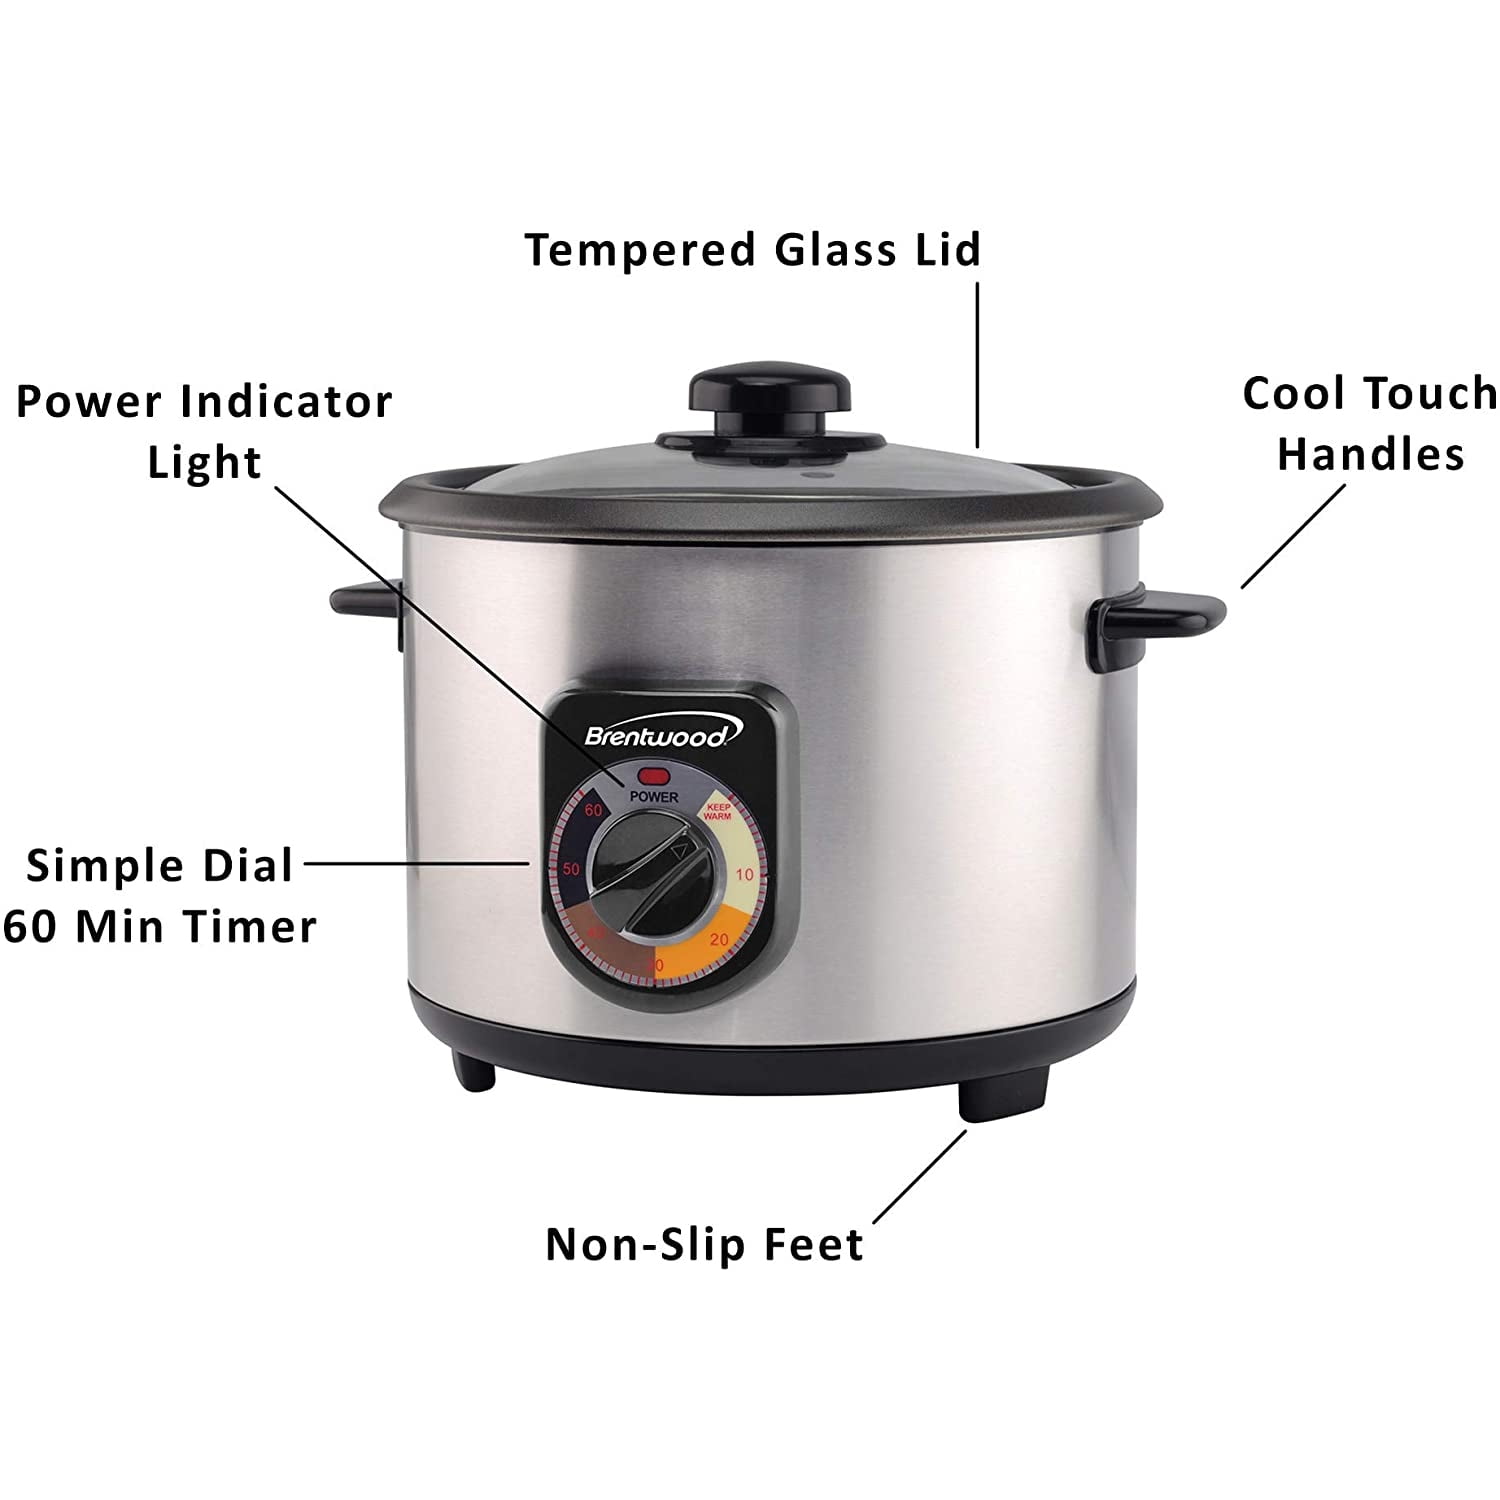 Stainless Steel Crunchy Persian Rice Cooker (16 Cups Cooked, 500 Watts) -  Office Garner